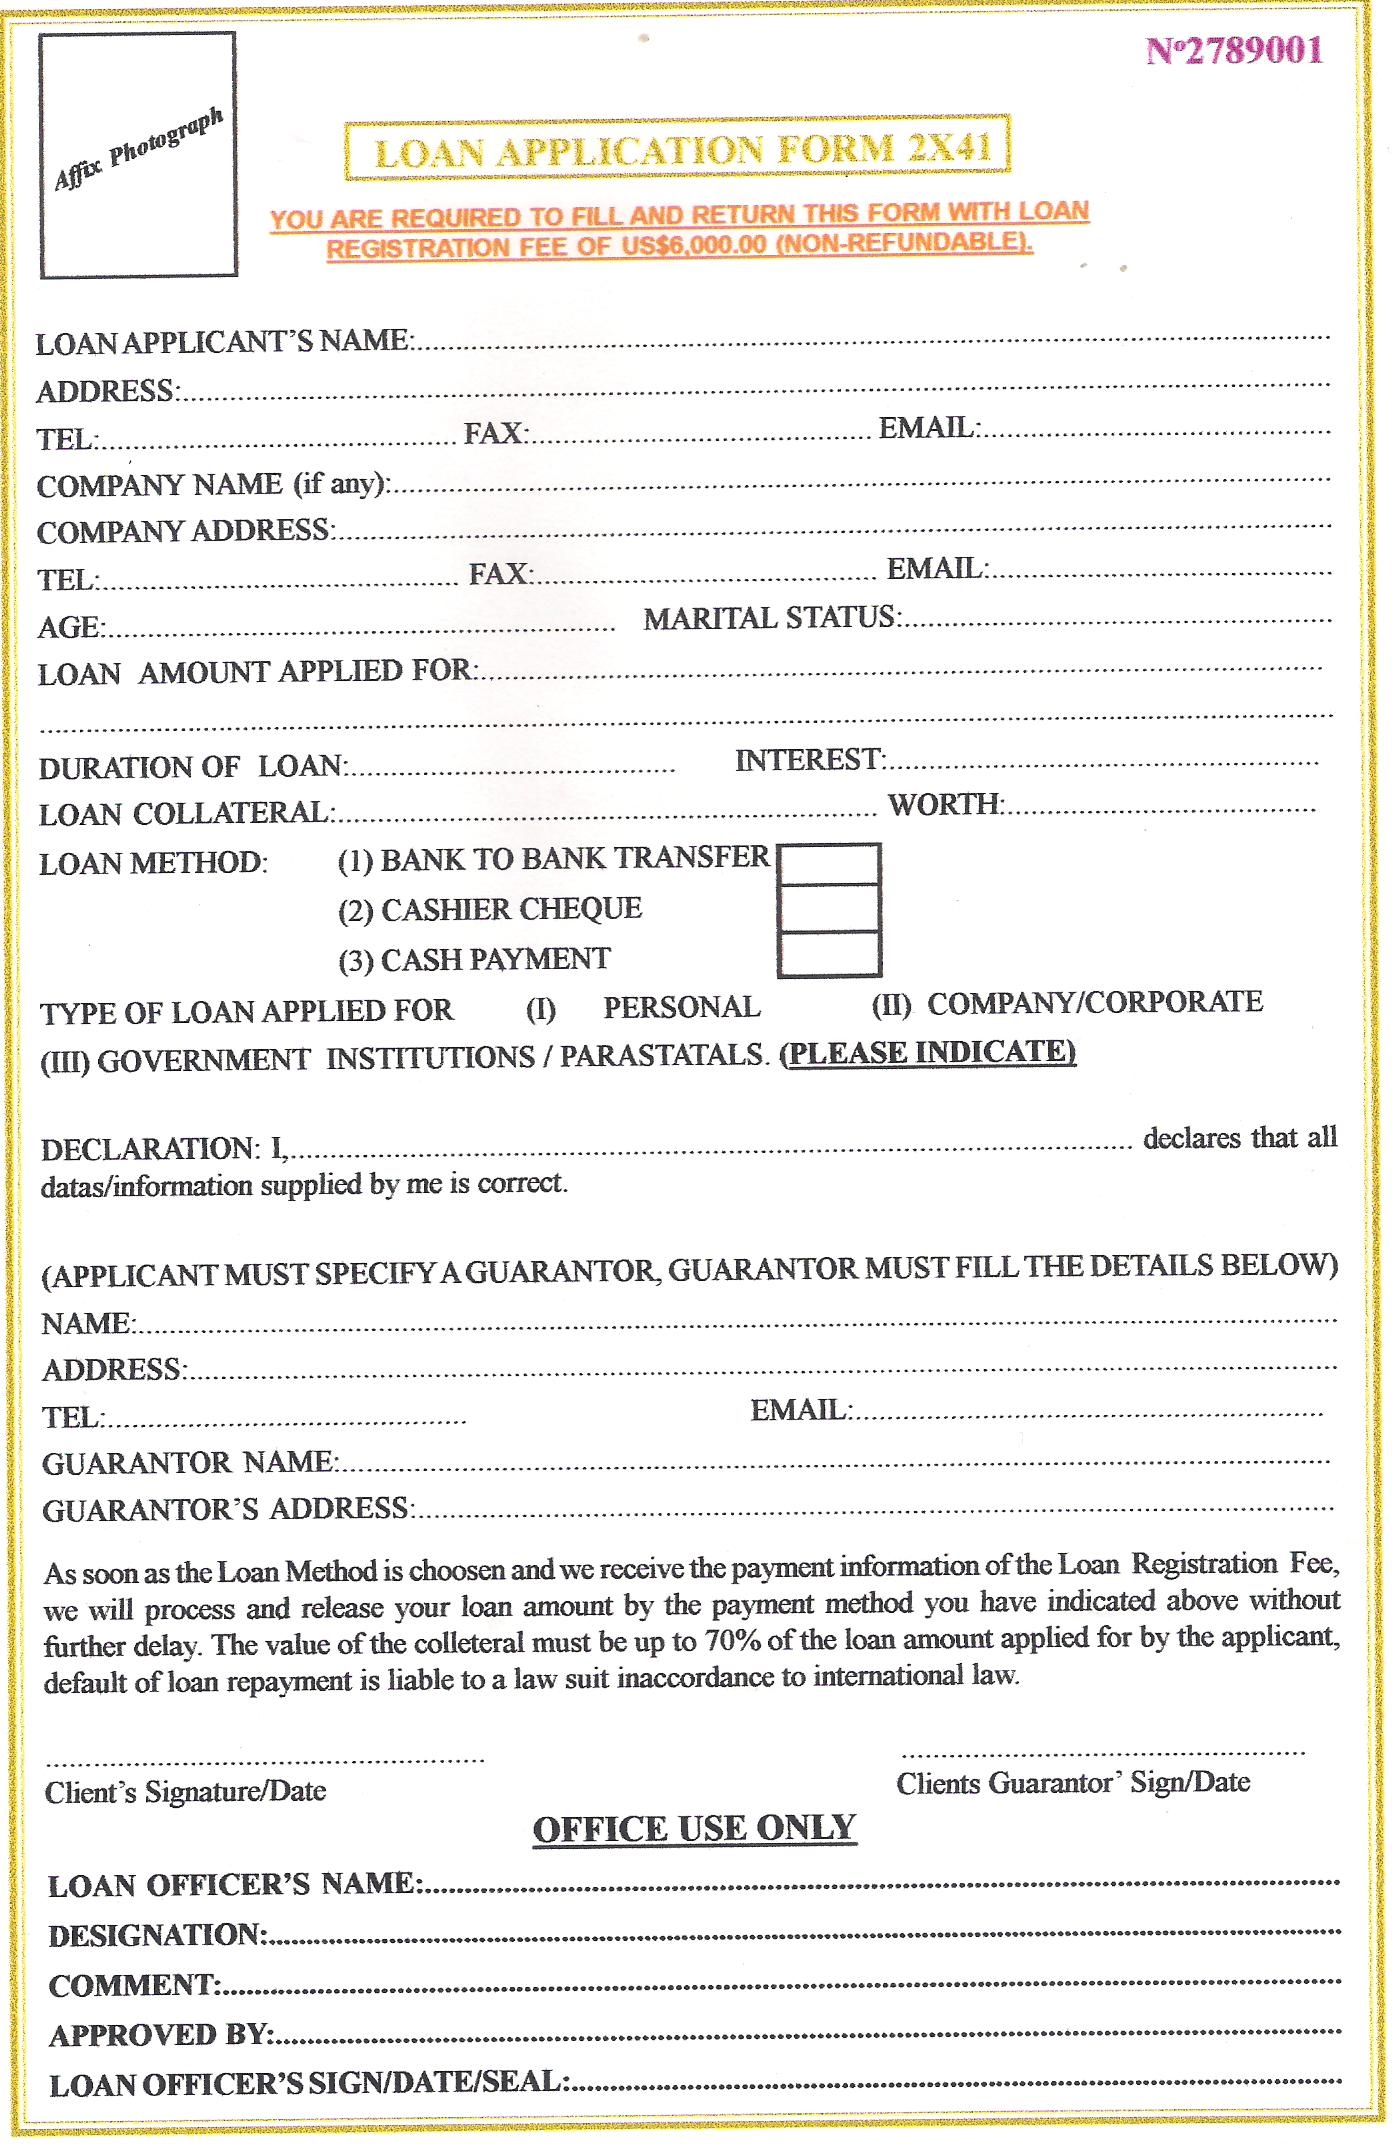 Loan Form sent to us 